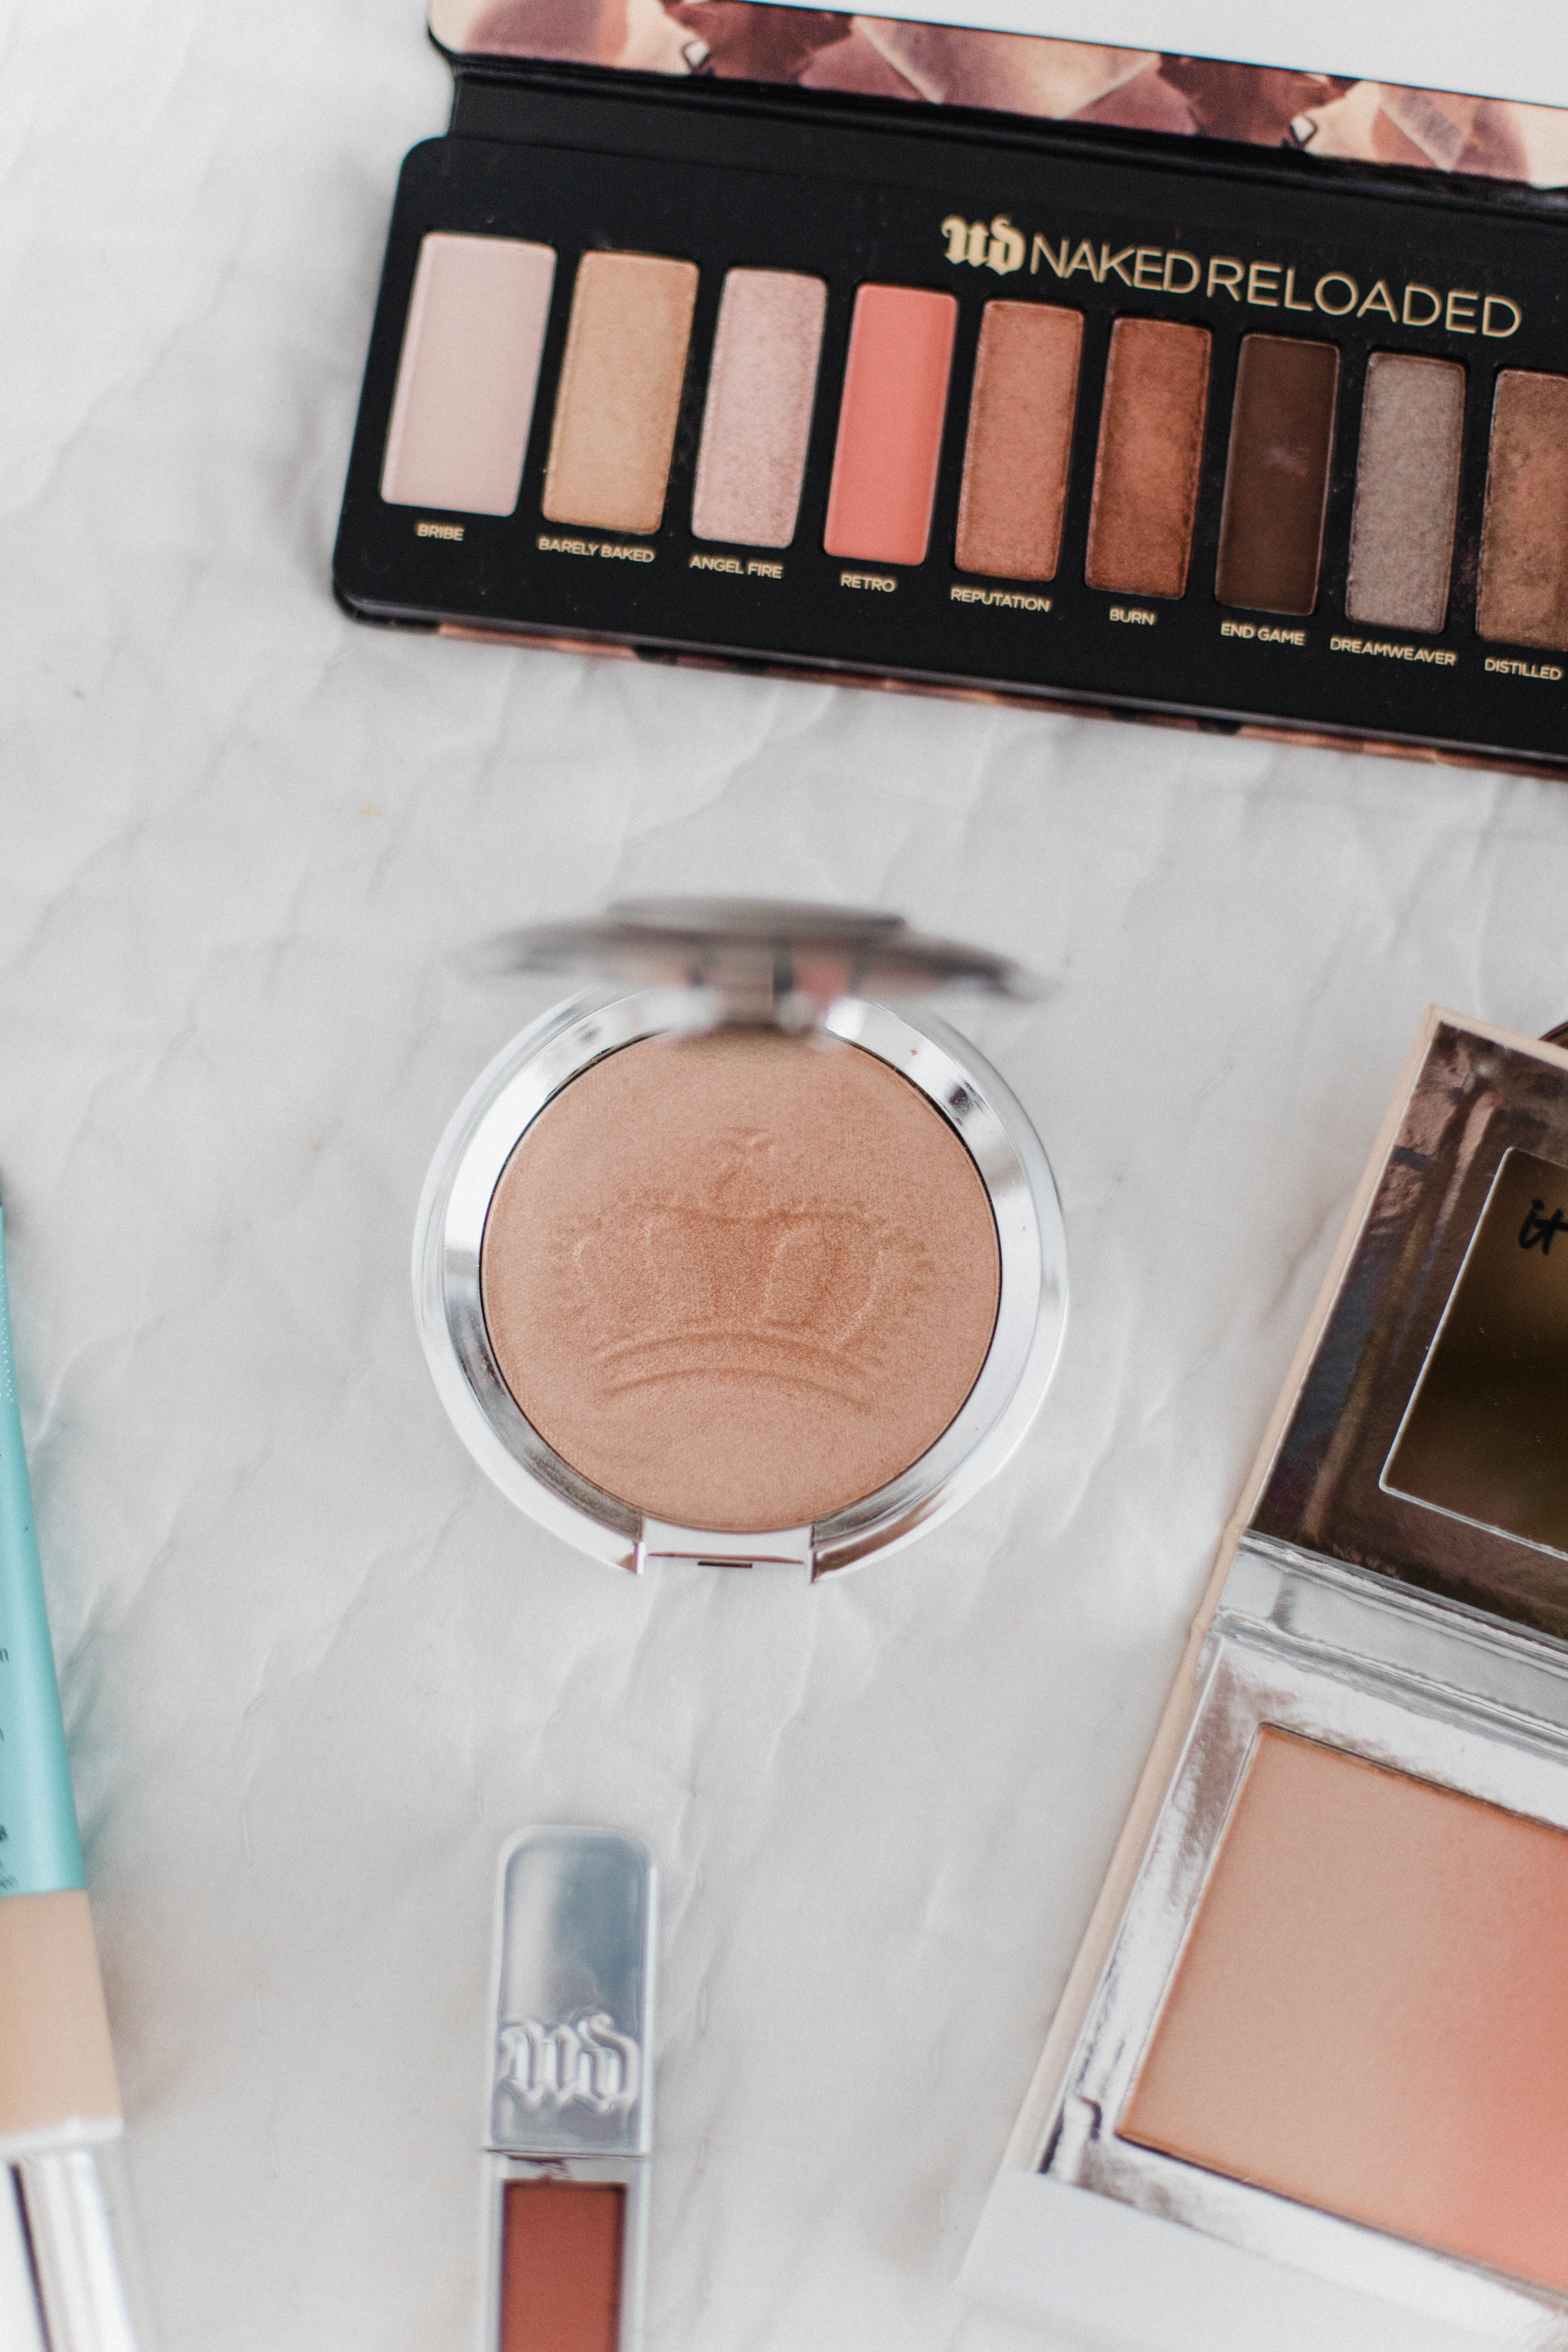 Connecticut life and style blogger Lauren McBride shares her favorite summer makeup products that give the perfect summer glow.